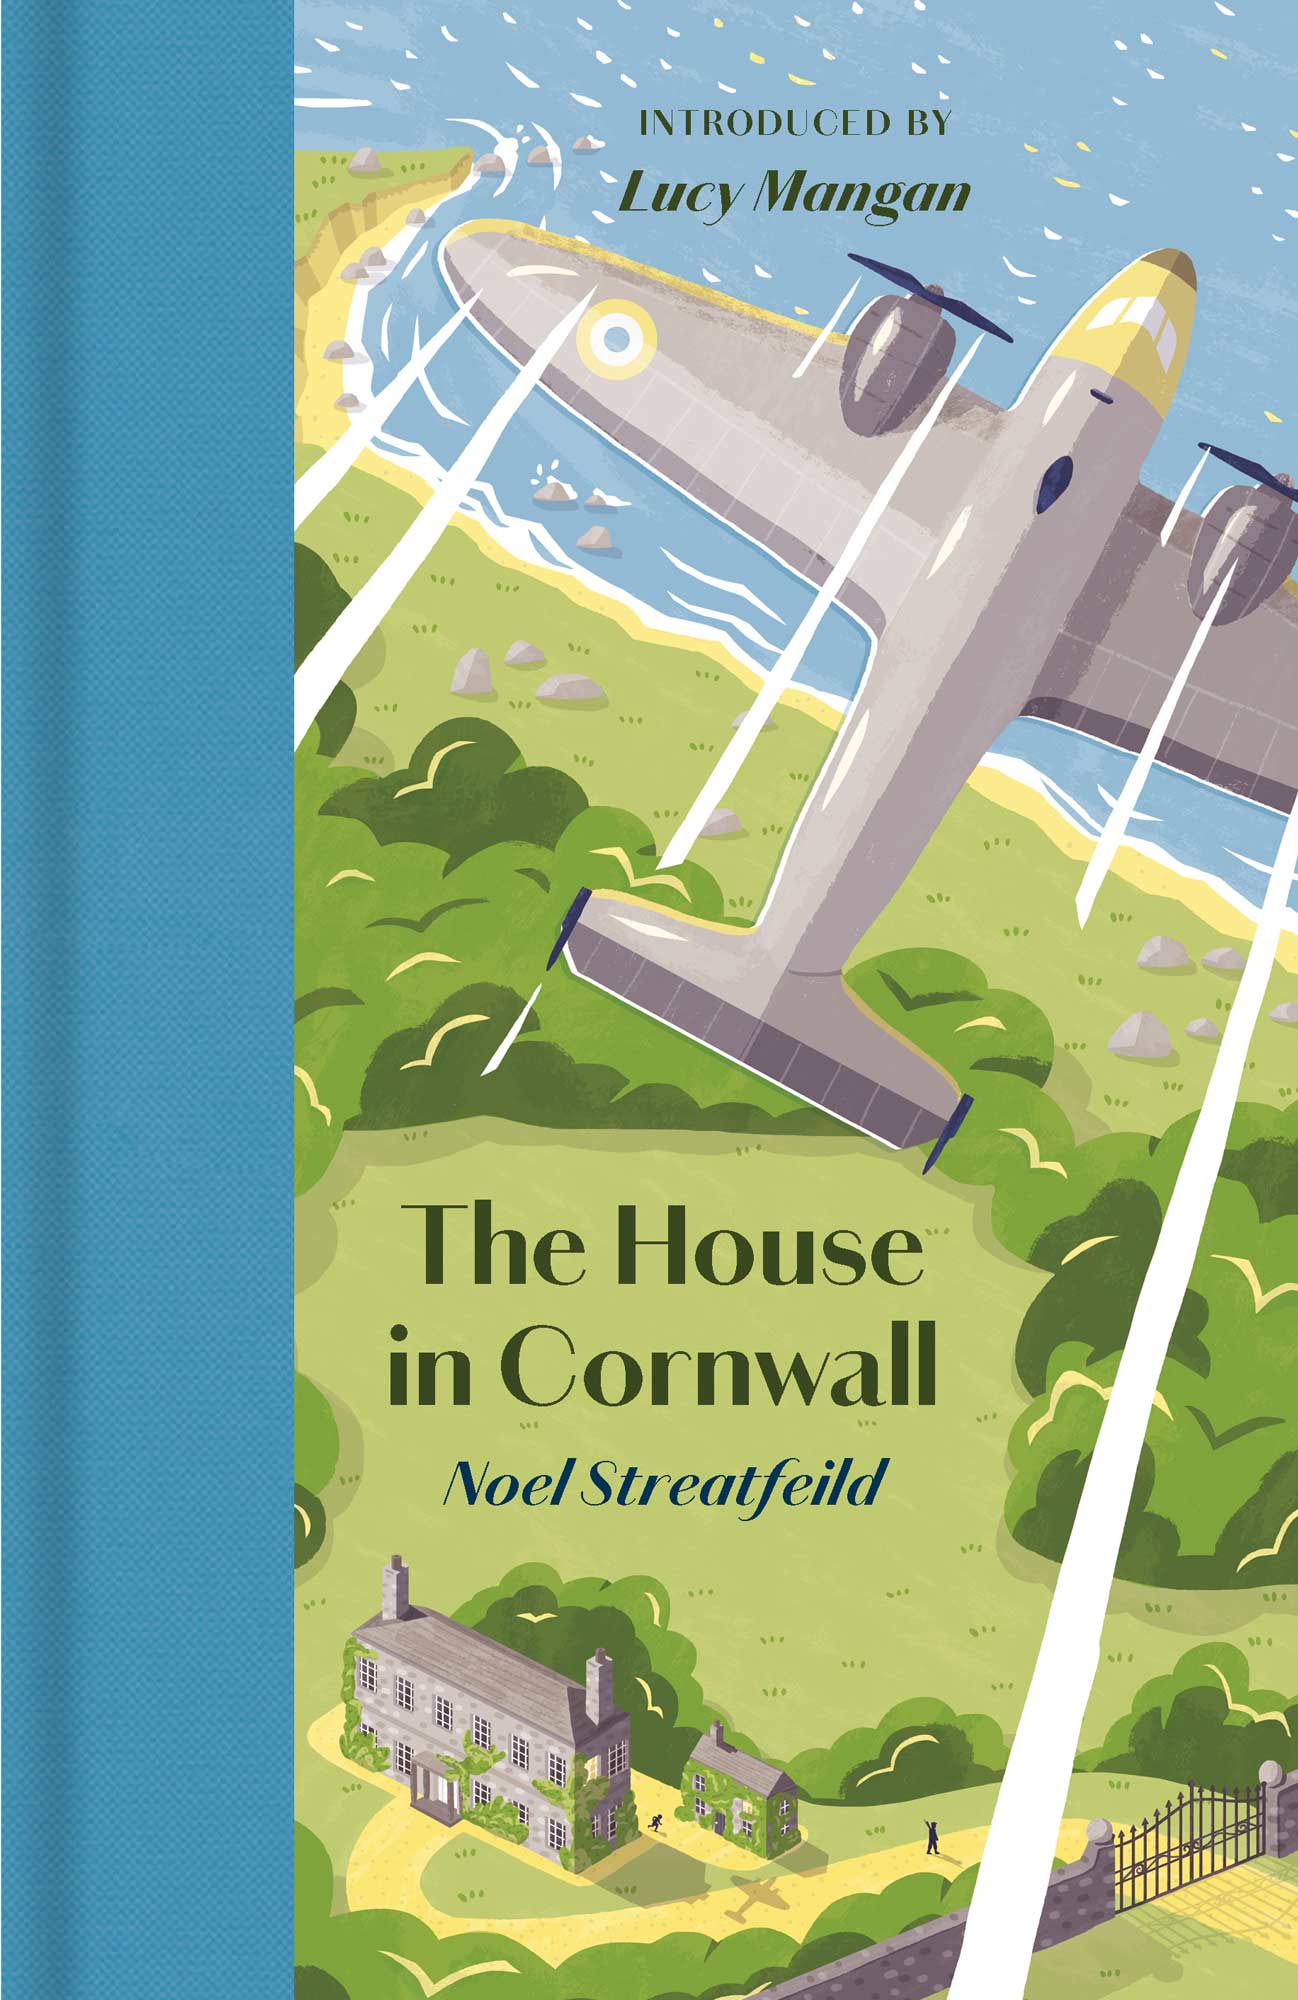 Front cover design for The House in Cornwall, by Elly Jahnz, published by Manderley Press.